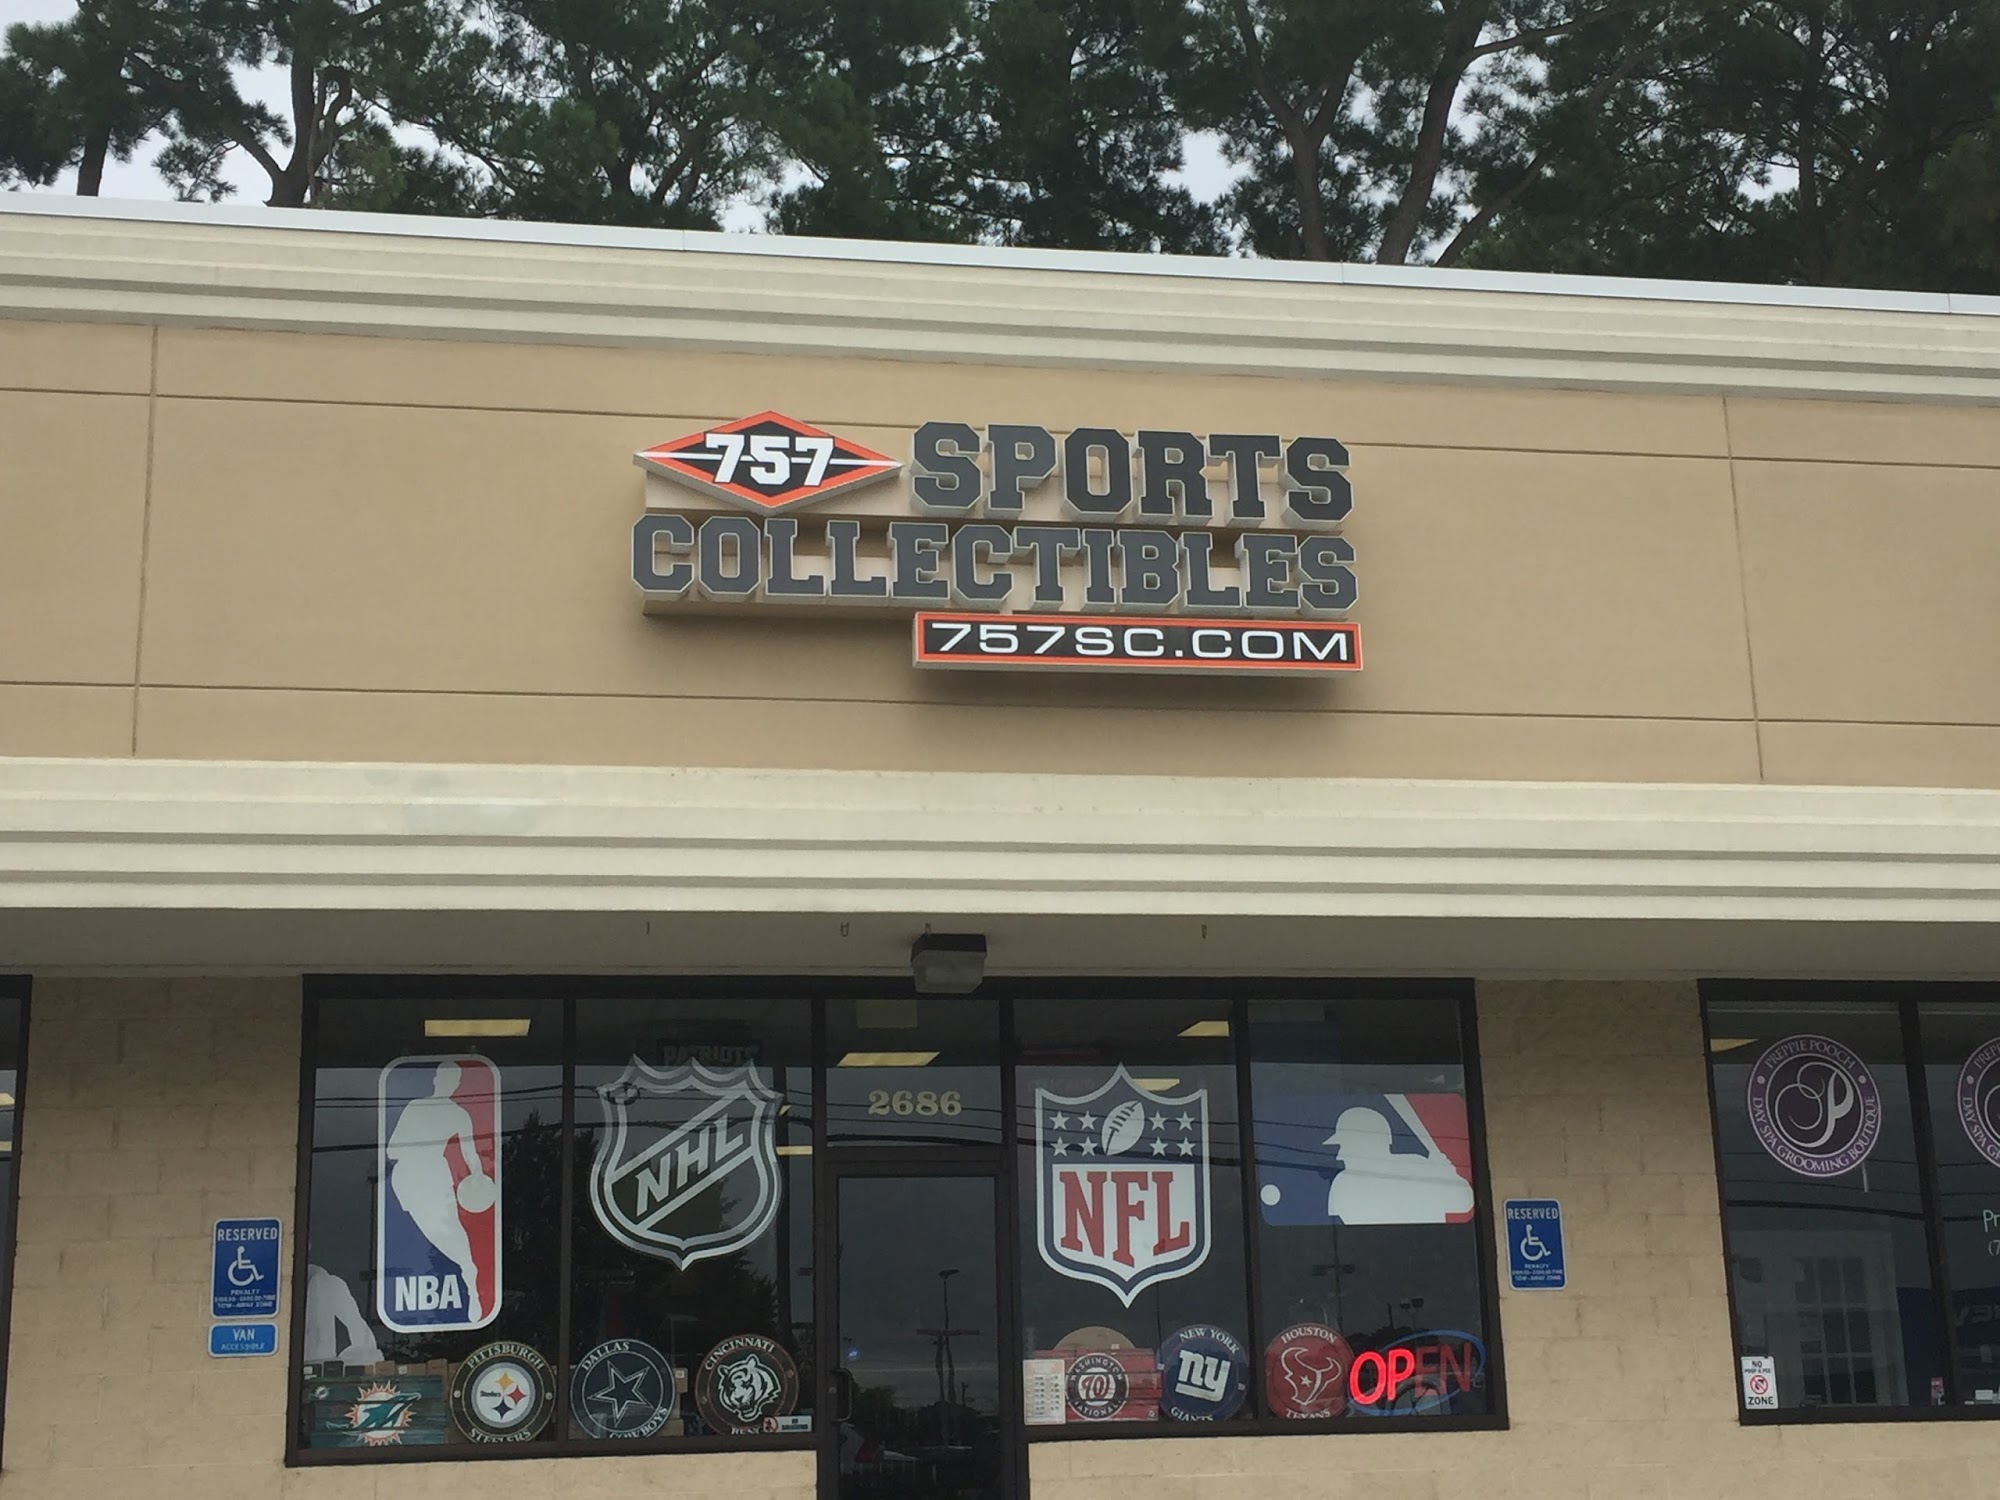 757 Sports Collectibles